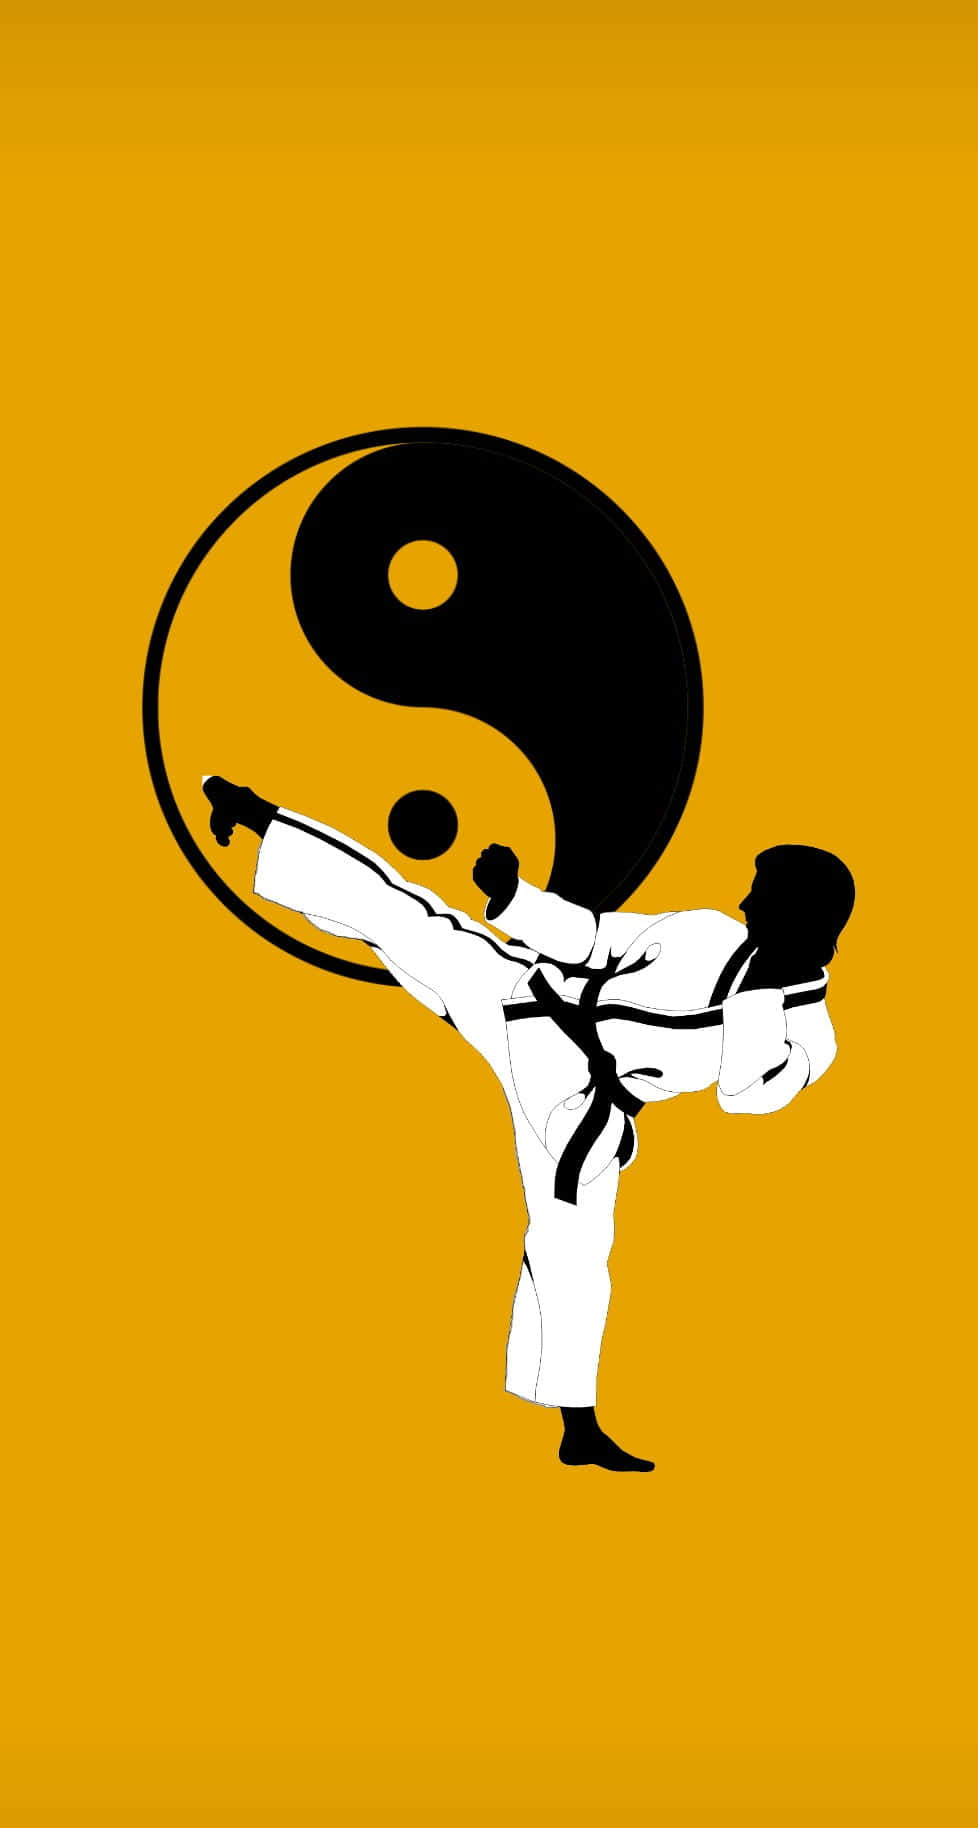 A Man Is Doing Karate On An Orange Background